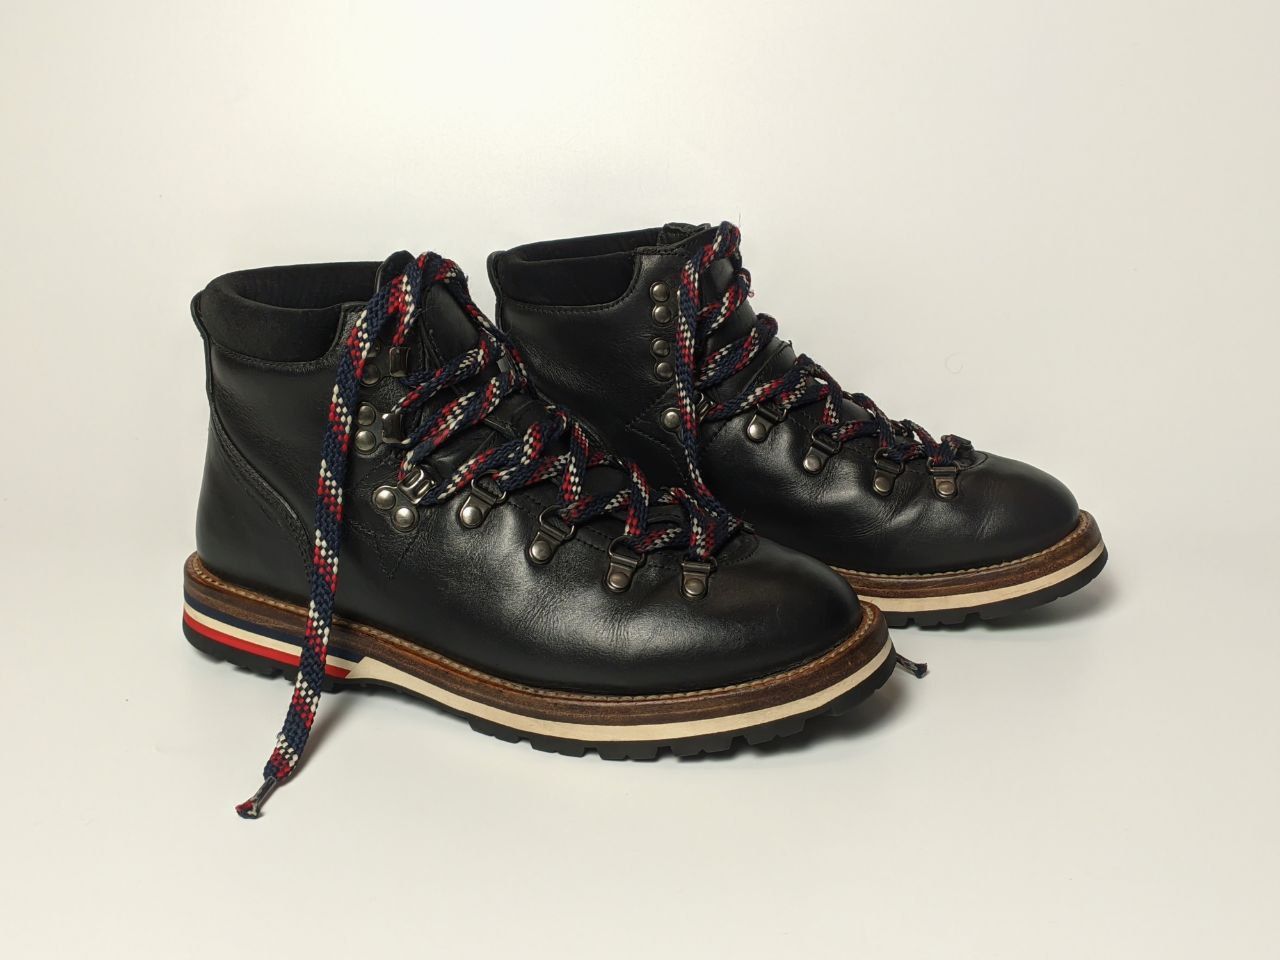 Moncler Blanche Ankle Hiking Boots
4500 грн